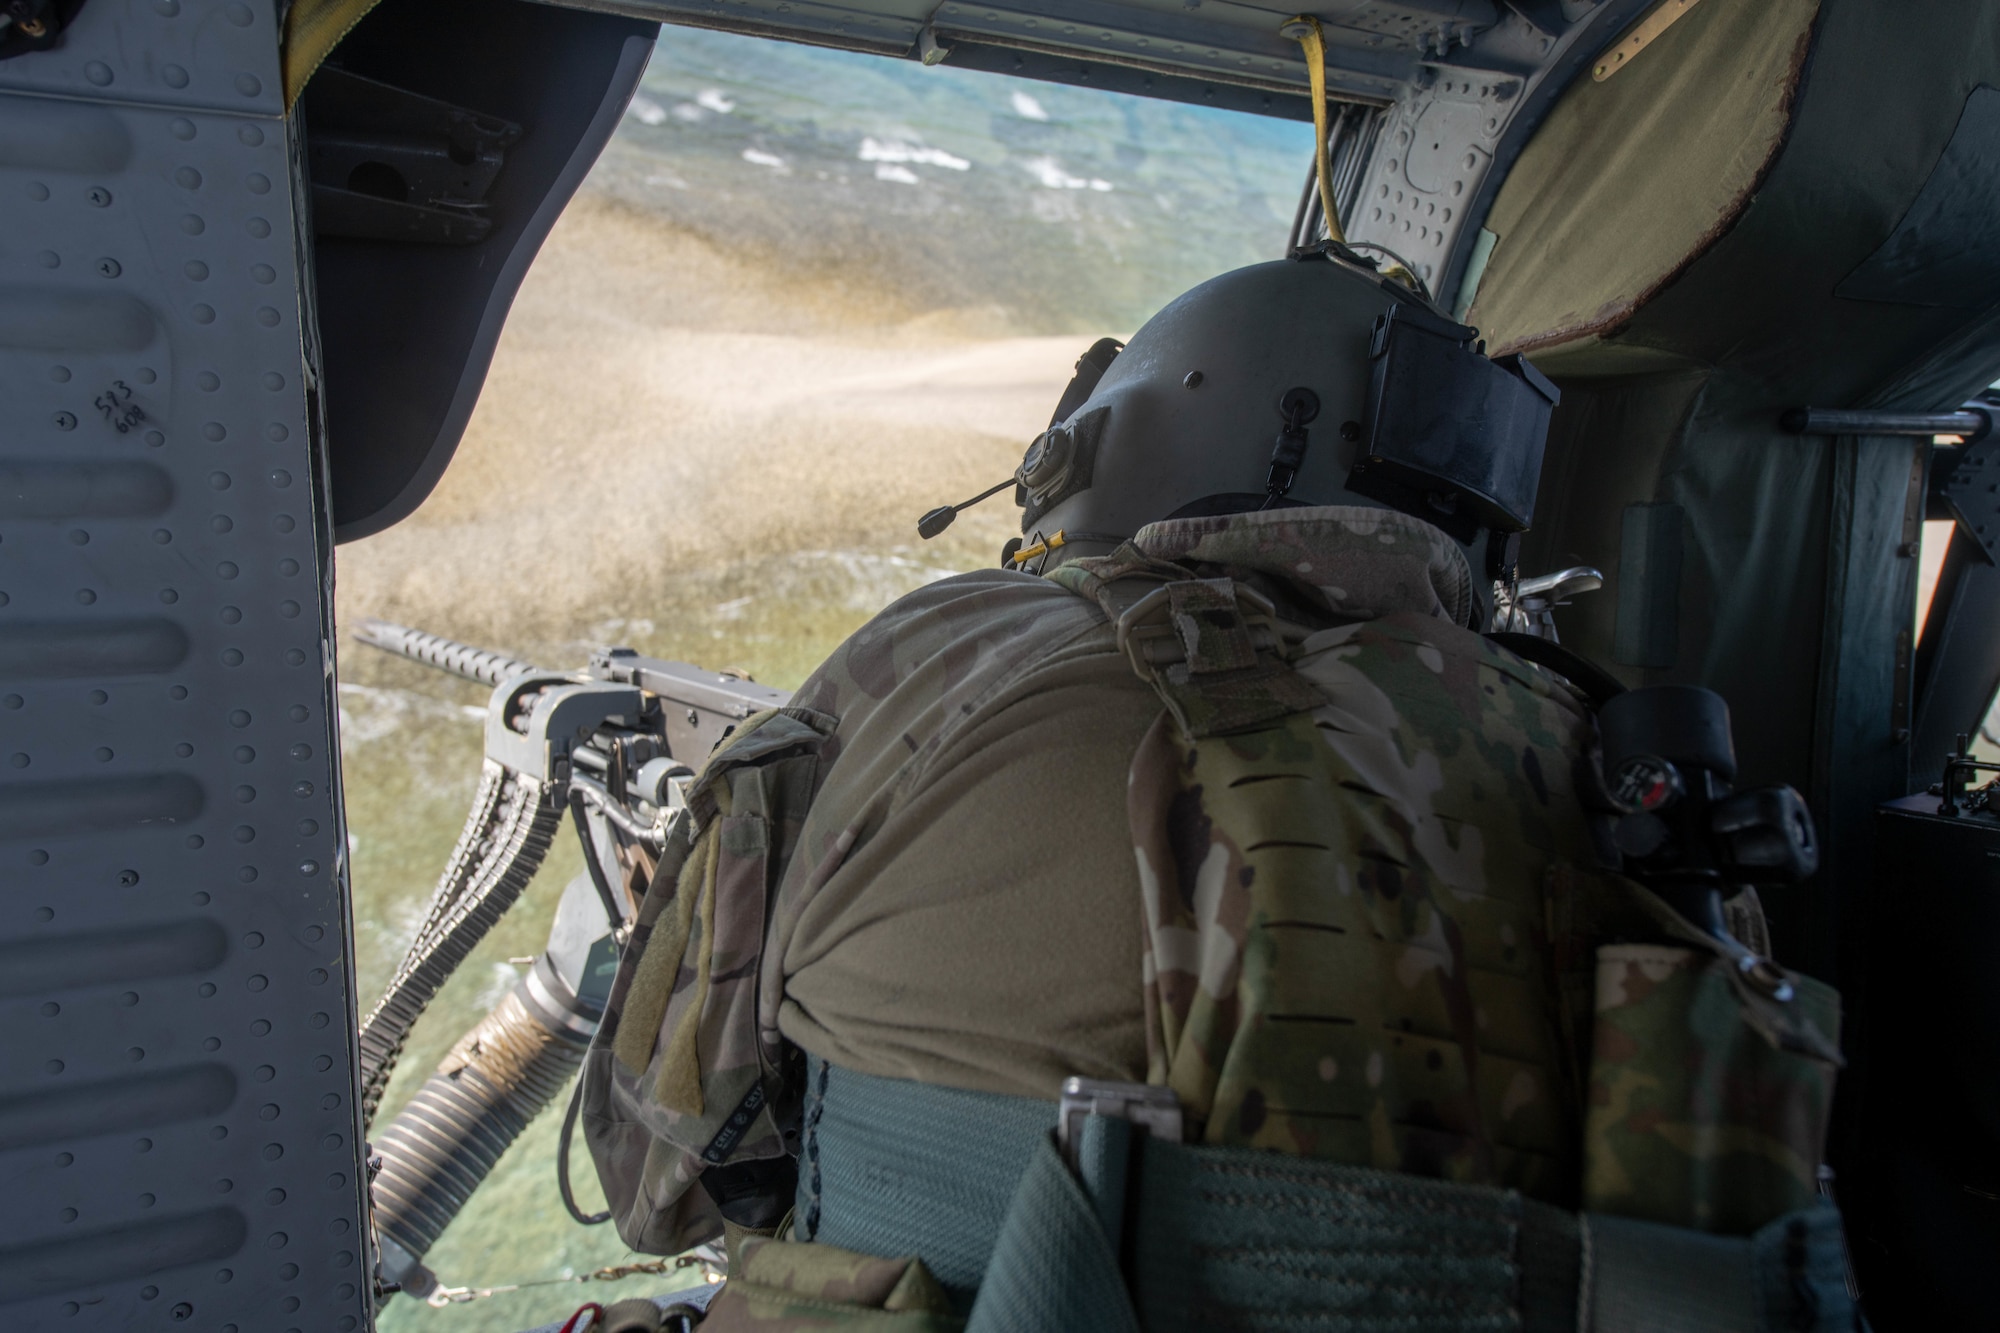 An Airman fires a door gun from a hovering helicopter.